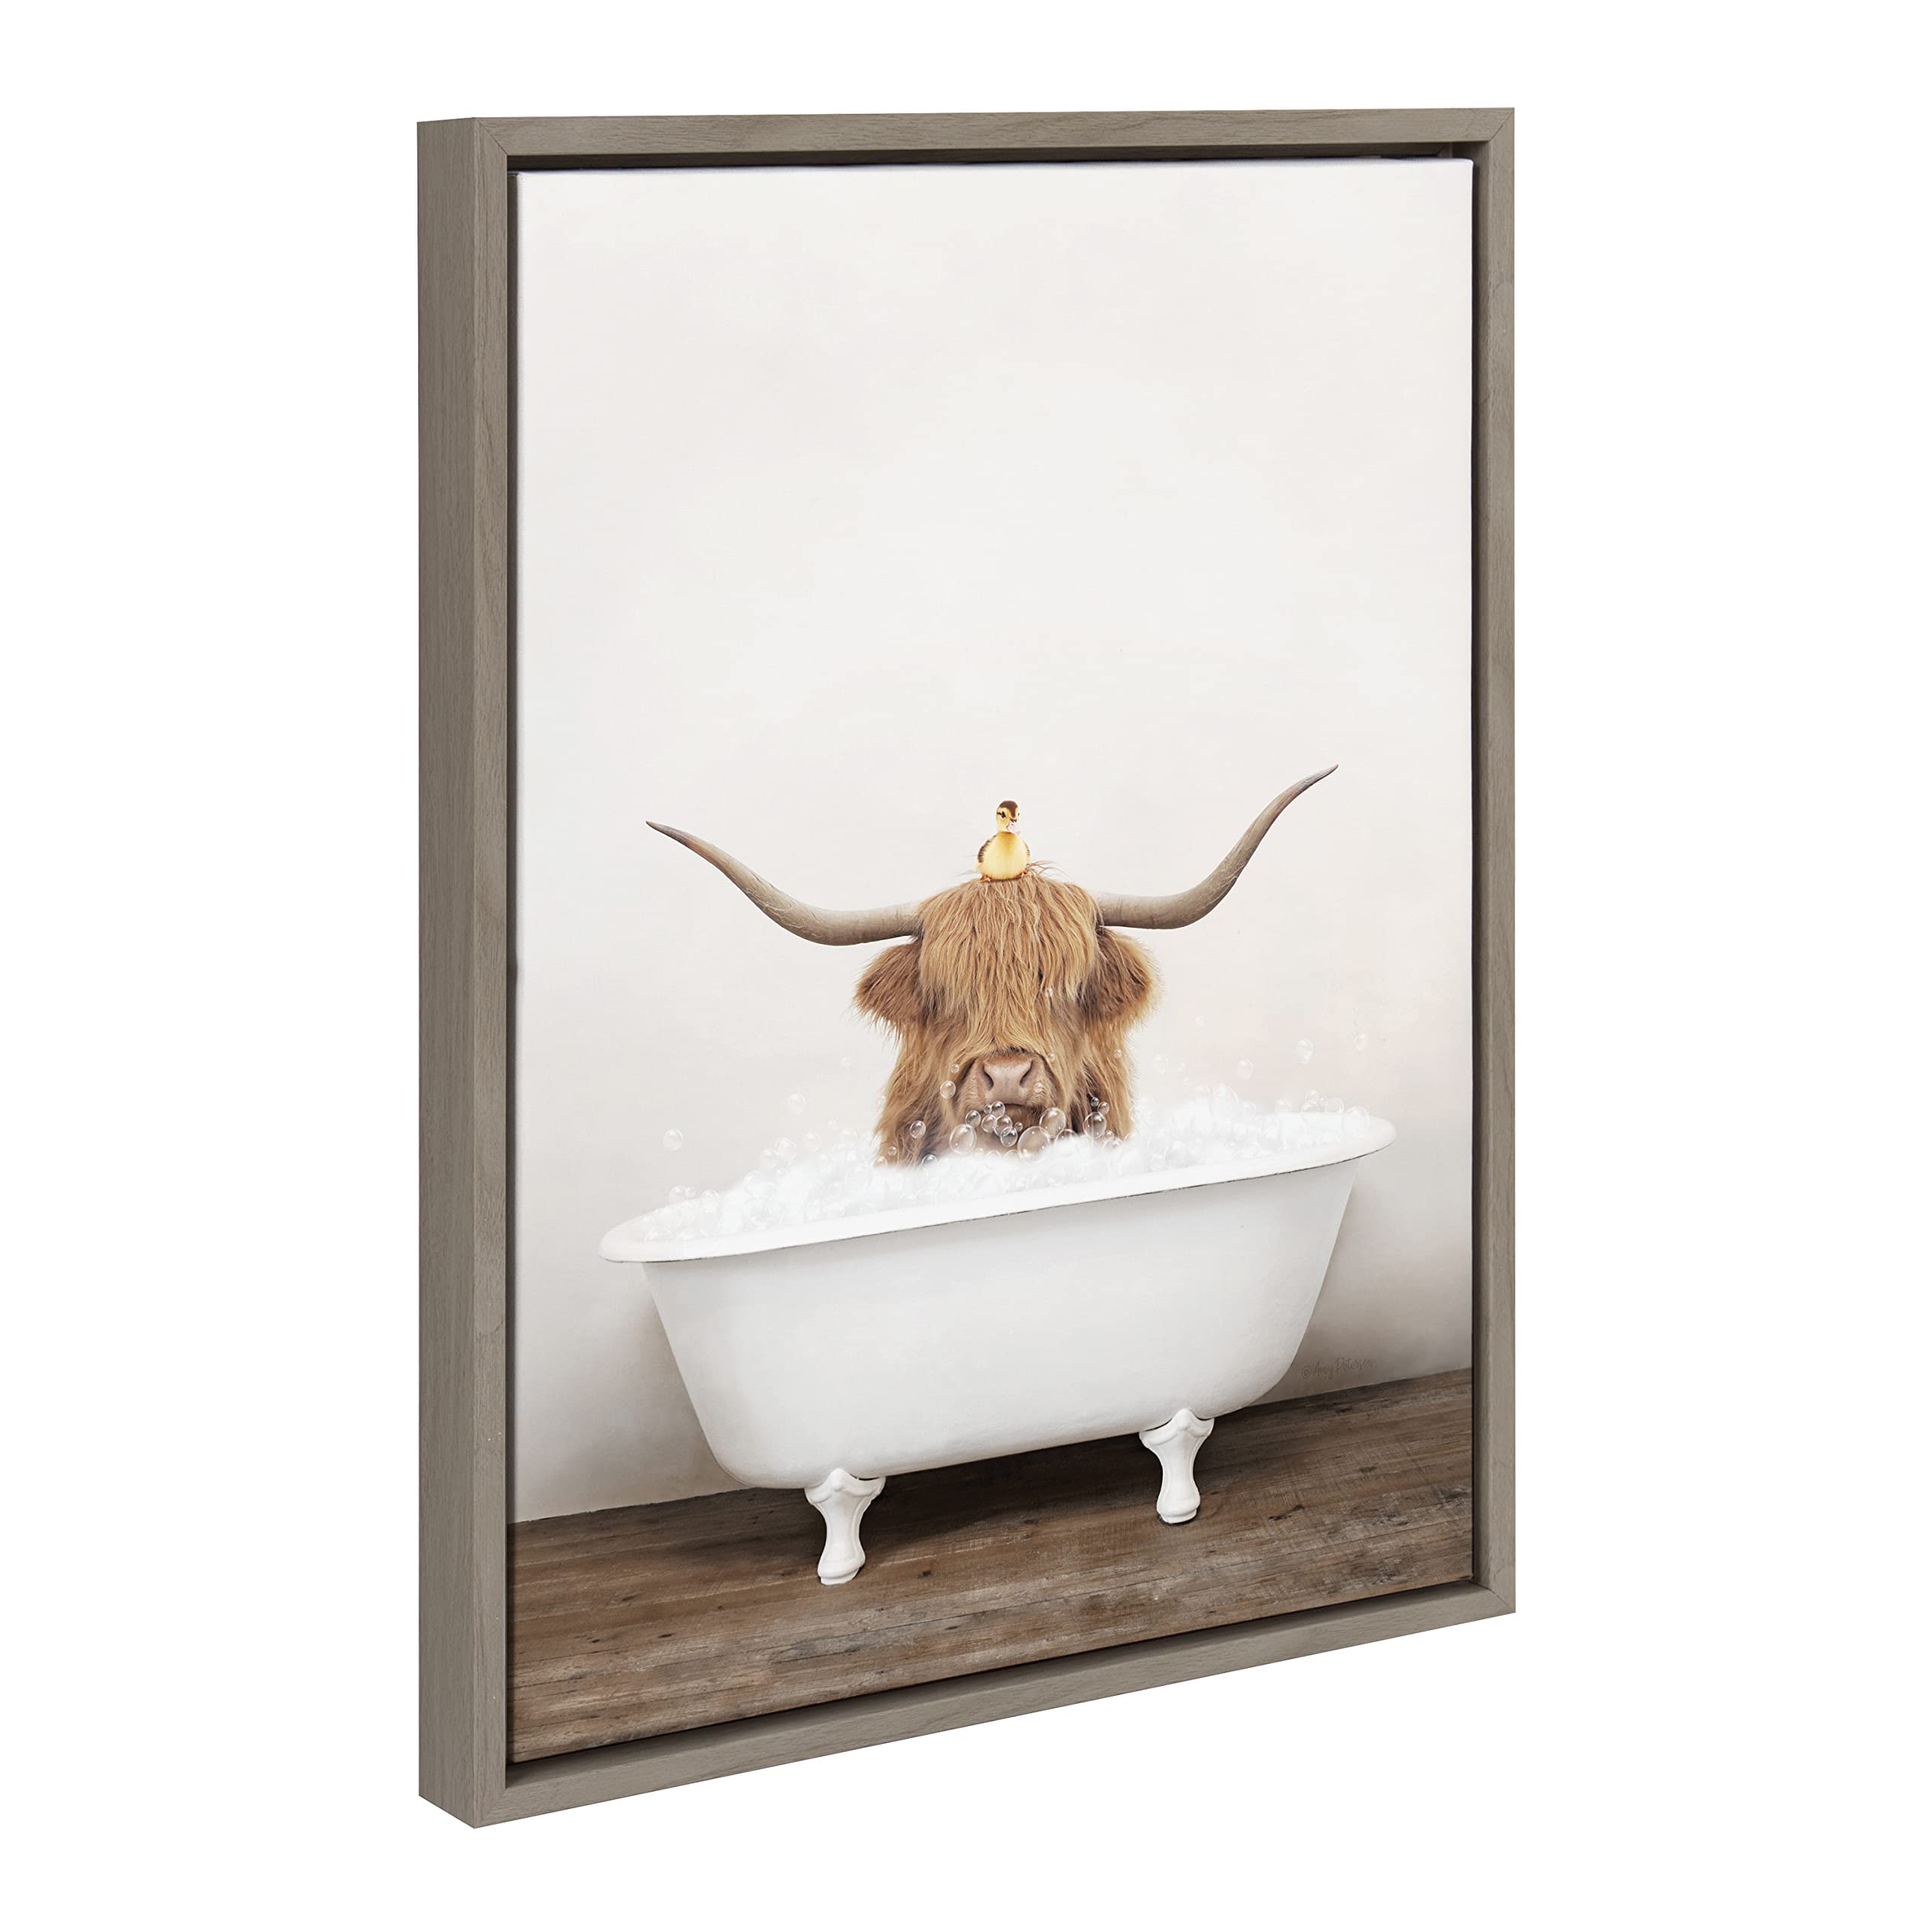 Kate and Laurel Sylvie Highland Cow and Duckling in Rustic Bath Framed Canvas Wall Art by Amy Peterson Art Studio, 18x24 Gray, Modern Fun Decorative Bathtub Wall Art for Home Décor